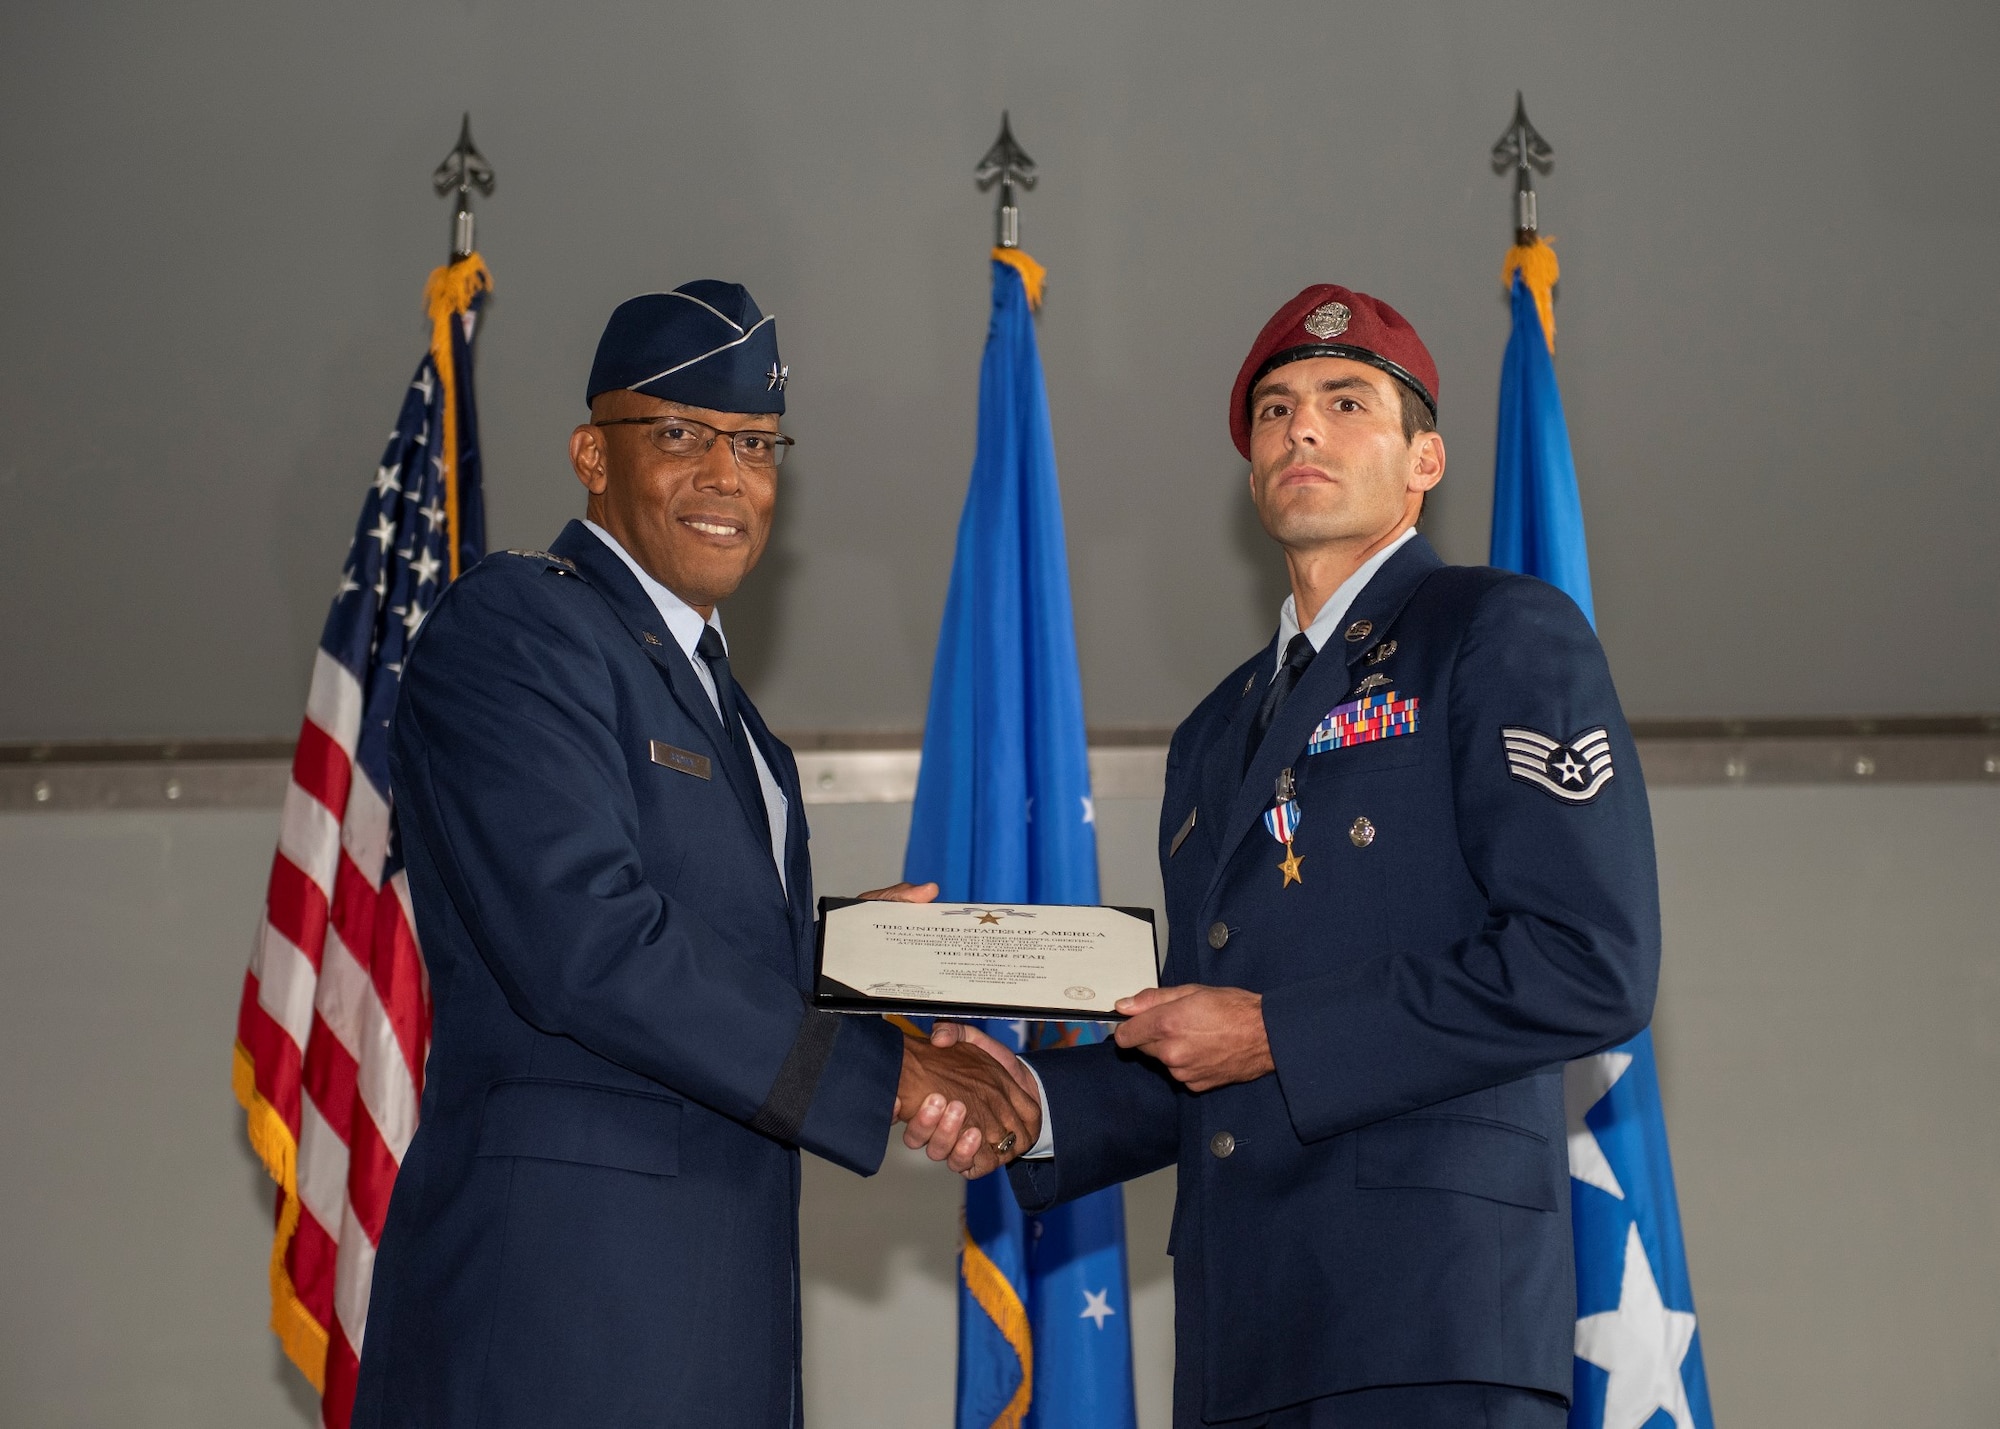 An Airman hold an award while presenting it to another Airman.